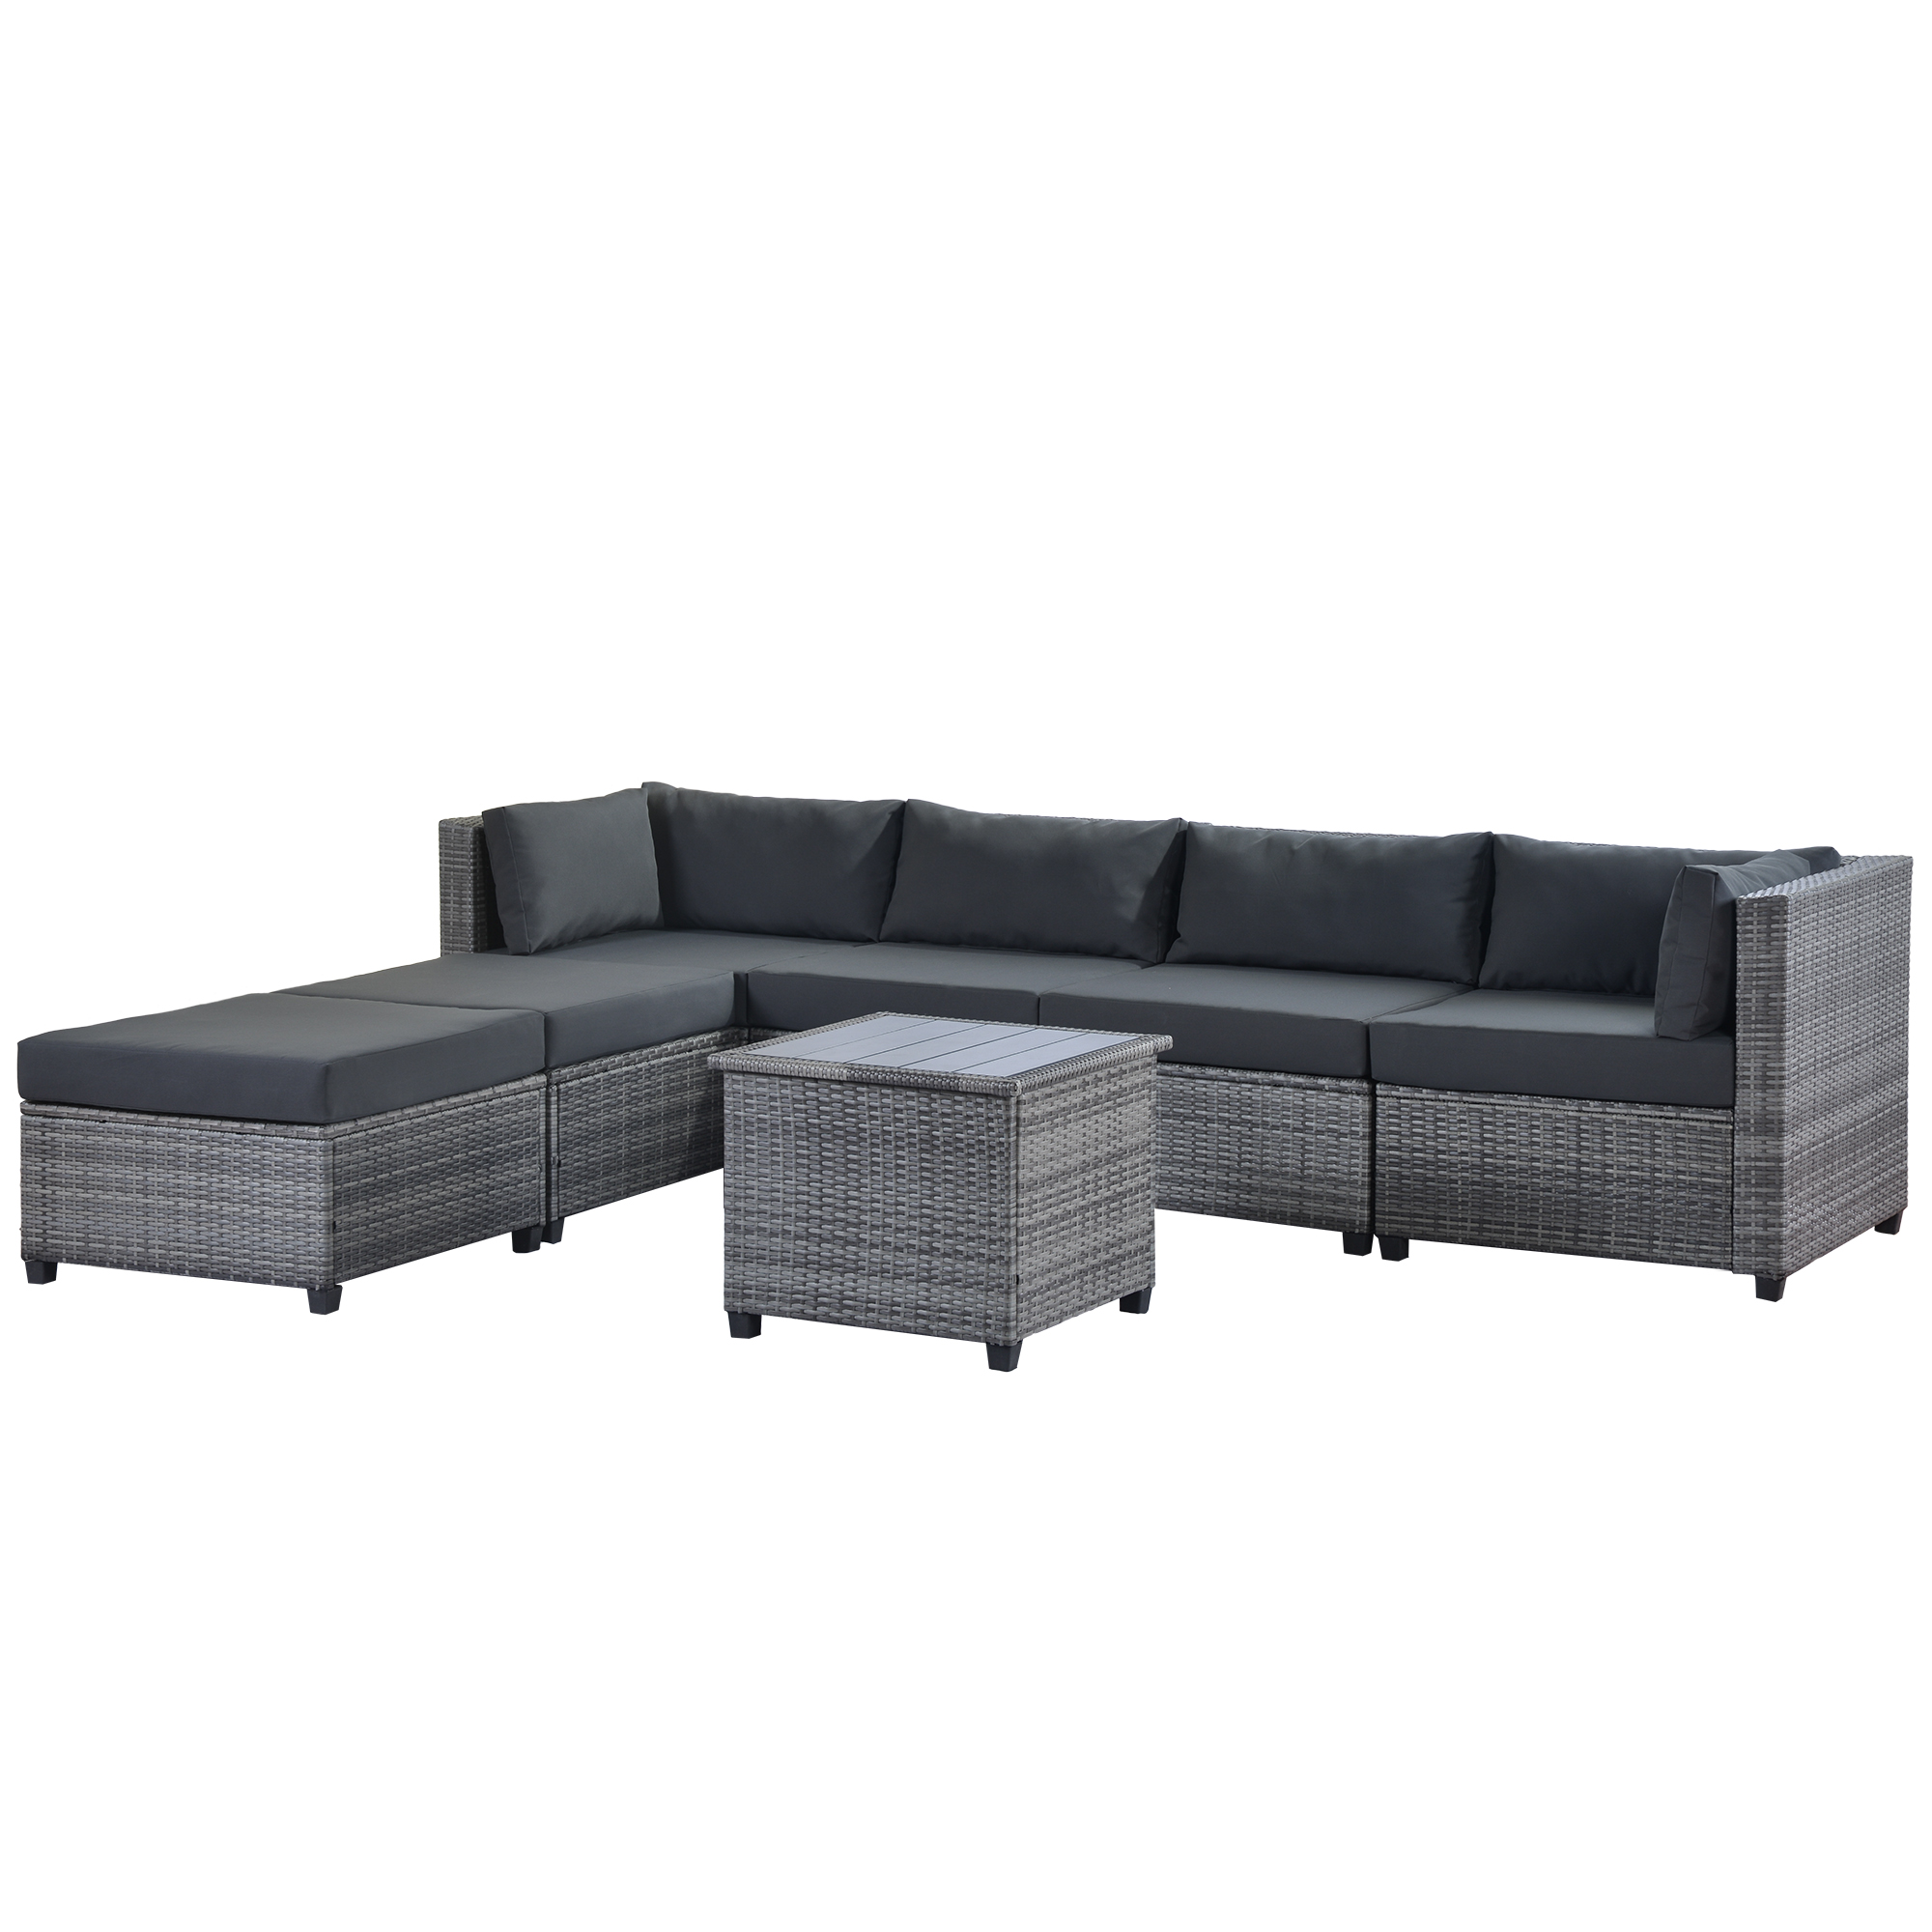 Wicker Patio Sets, 7 Piece Patio Furniture Sofa Sets with 4 PE Wicker Sofas, 2 Ottoman, Coffee Table, All-Weather Patio Conversation Set with Cushions for Backyard, Porch, Garden, Poolside, LLL39 - image 4 of 10